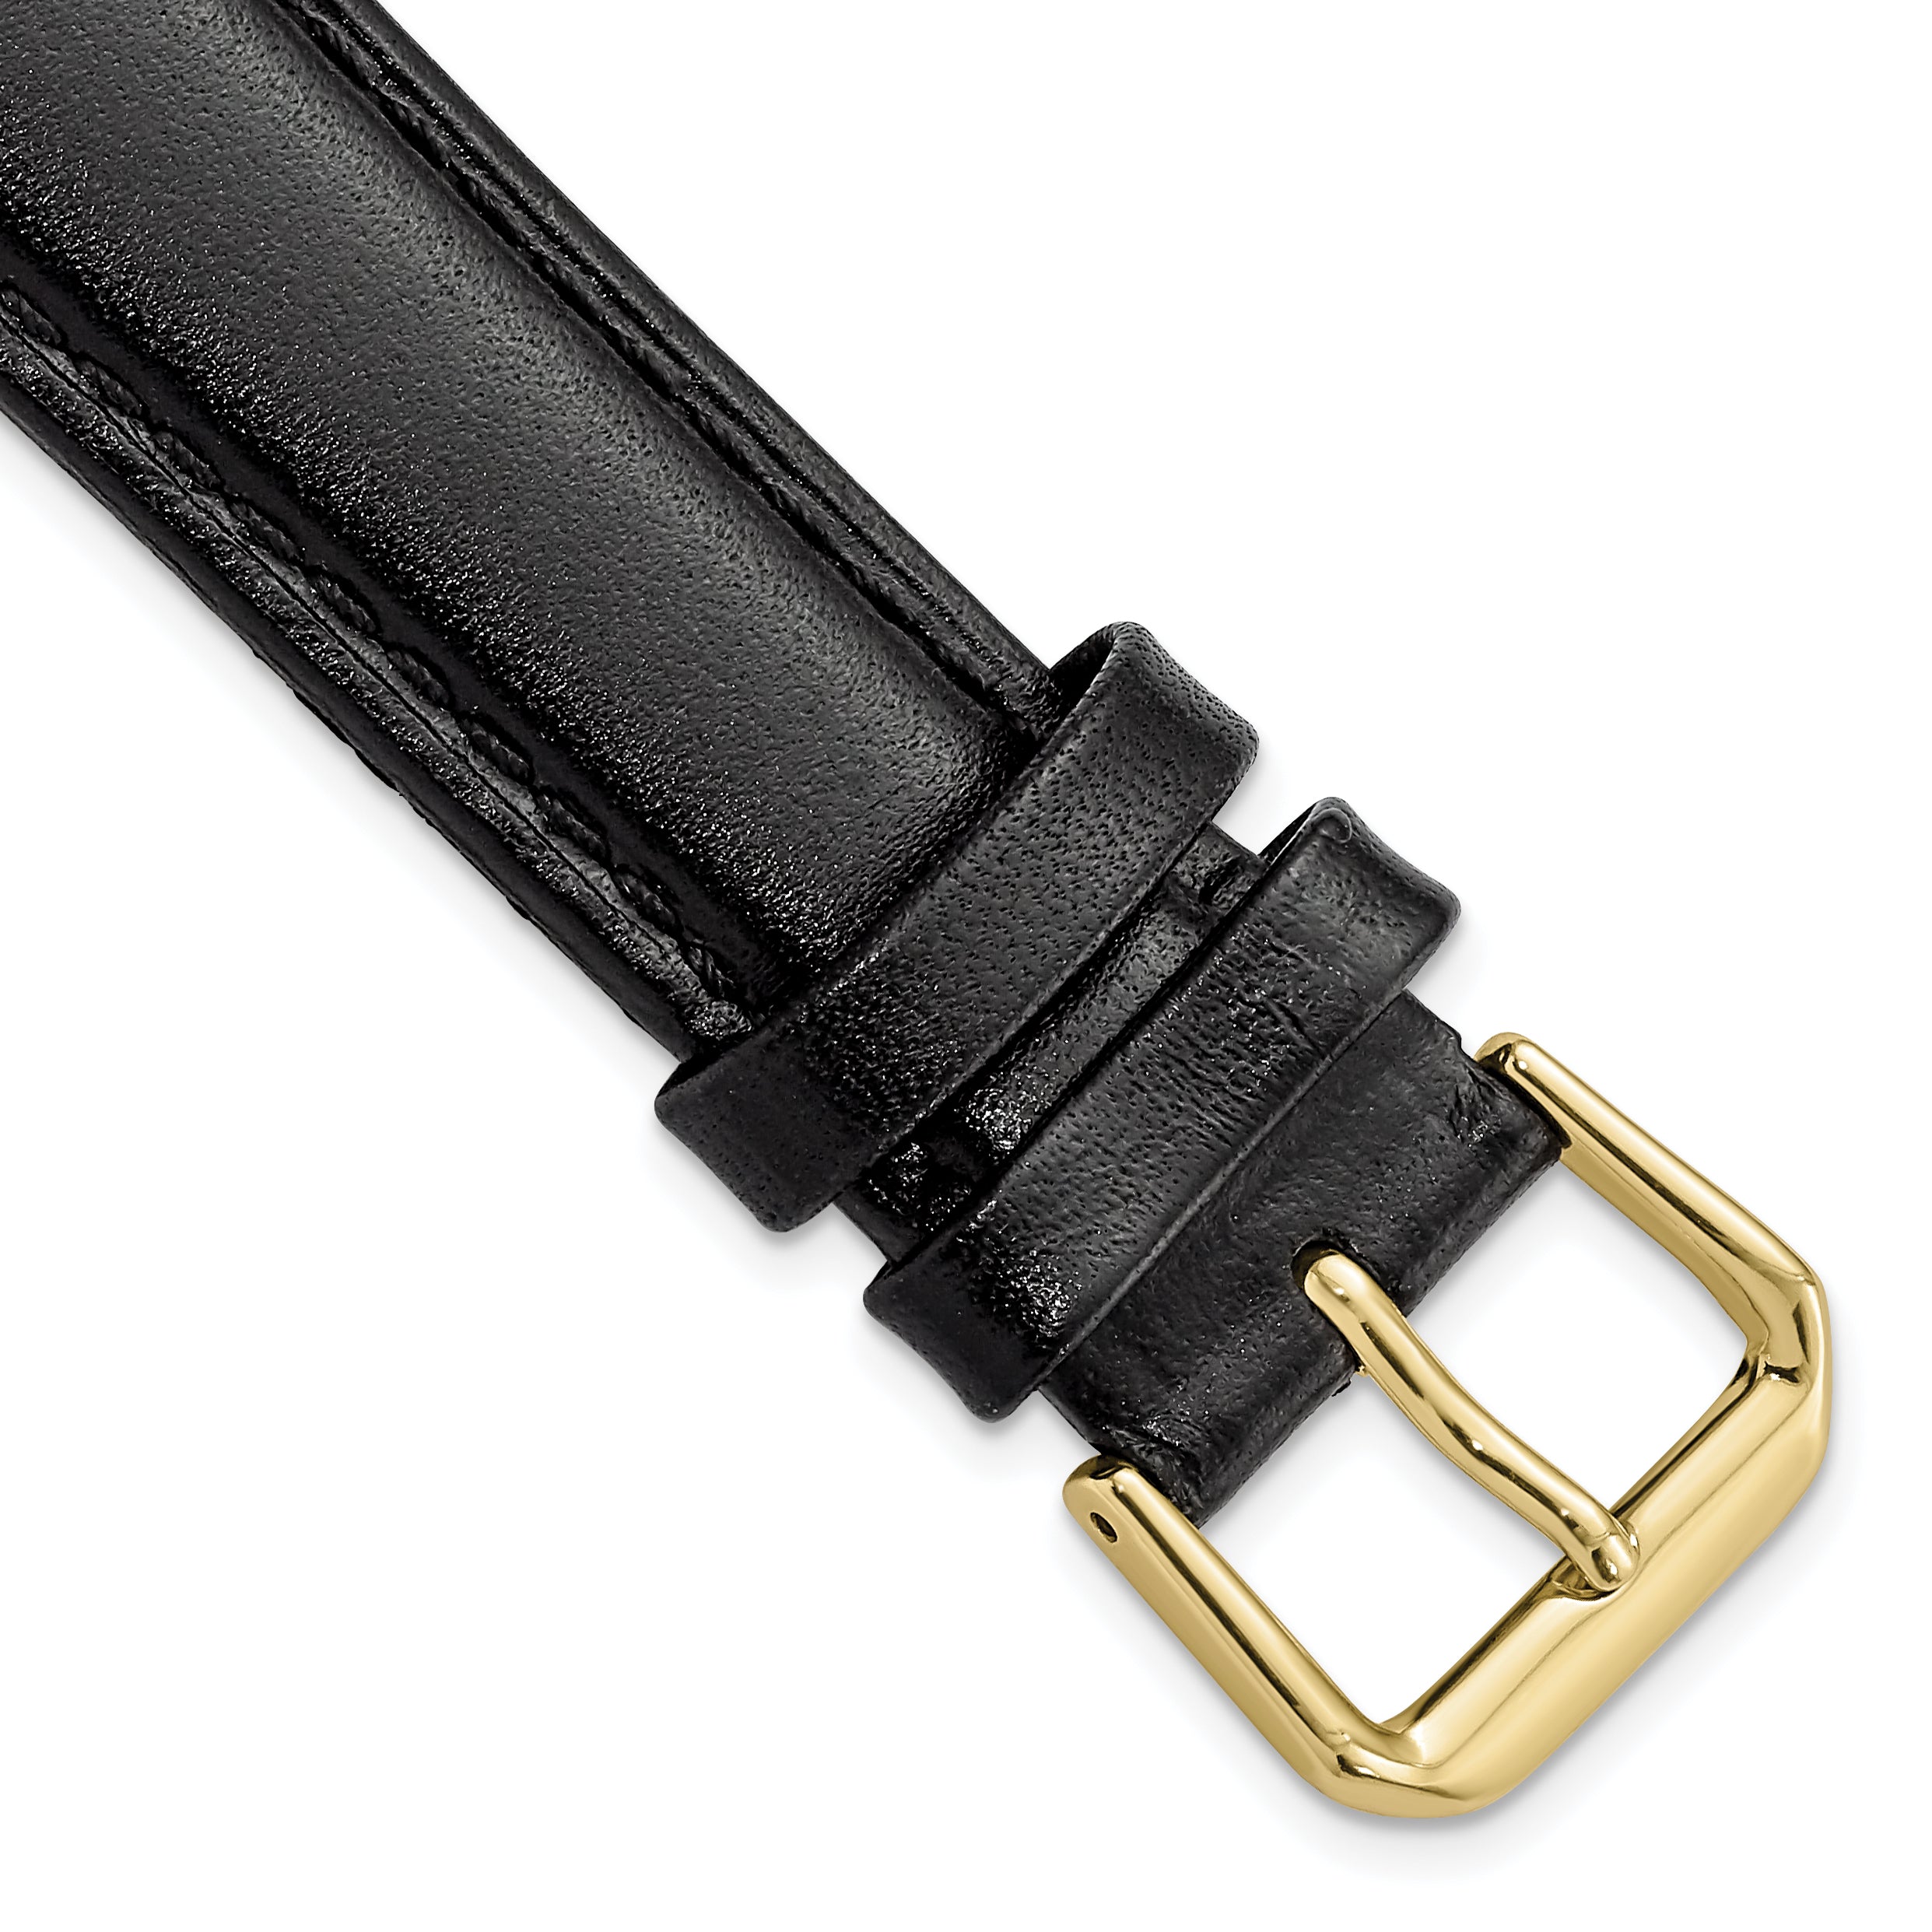 DeBeer 19mm Black Long Smooth Leather with Gold-tone Buckle 8.5 inch Watch Band